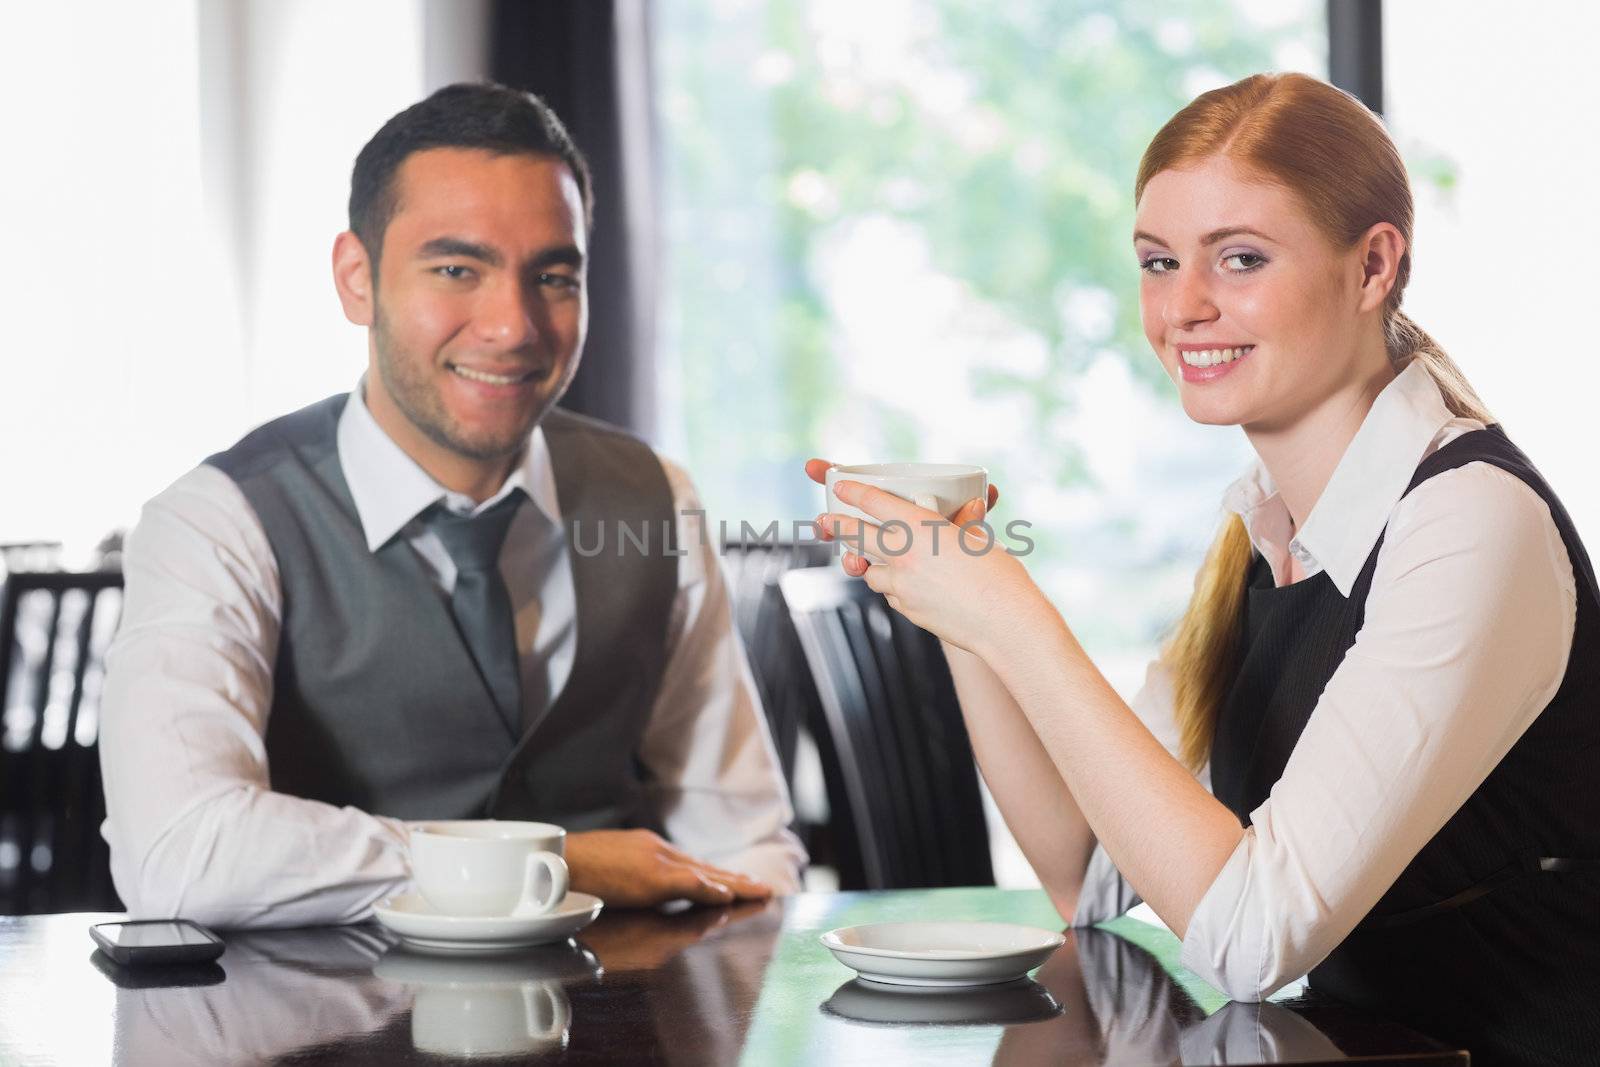 Business people having coffee and looking at camera in a cafe